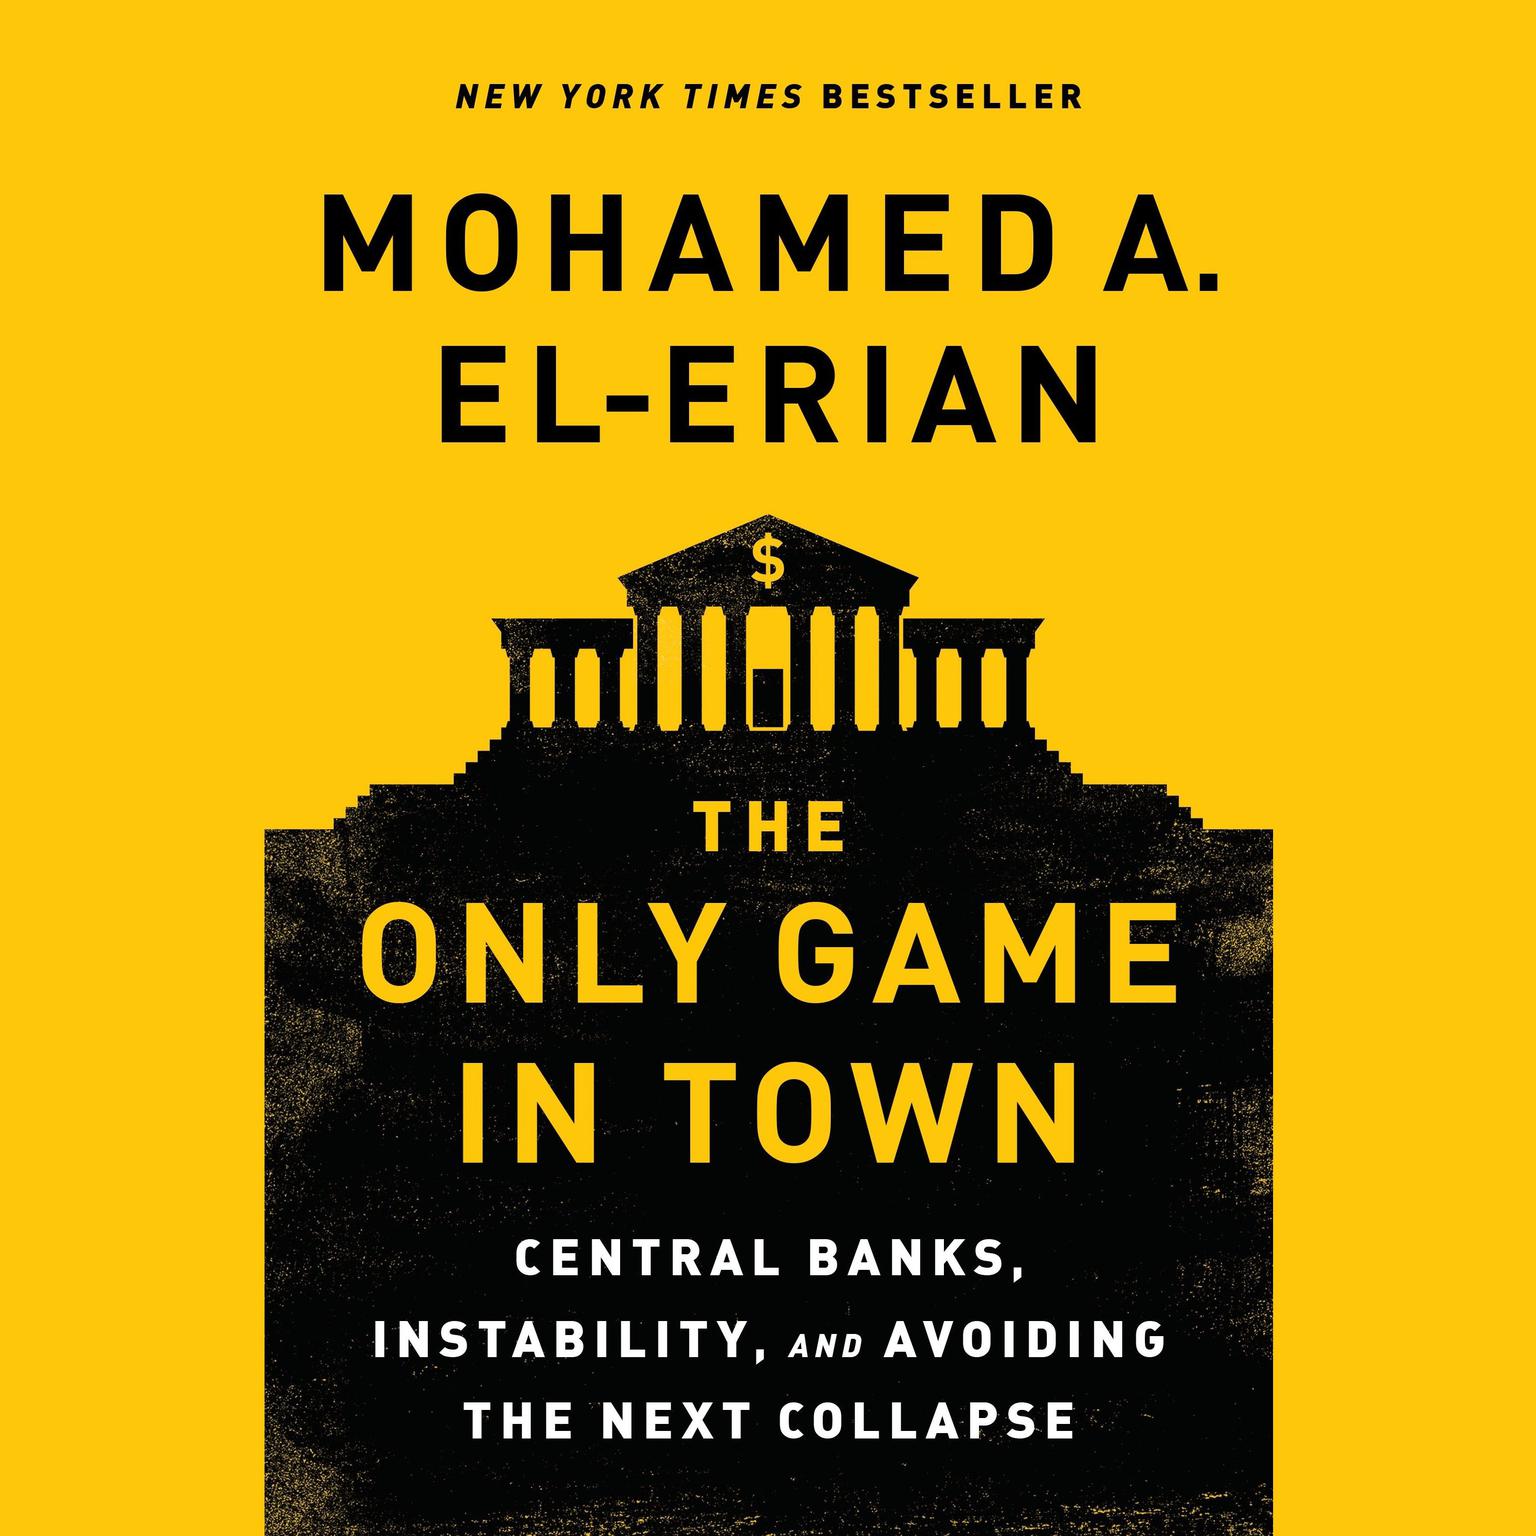 The Only Game in Town: Central Banks, Instability, and Avoiding the Next Collapse Audiobook, by Mohamed A. El-Erian